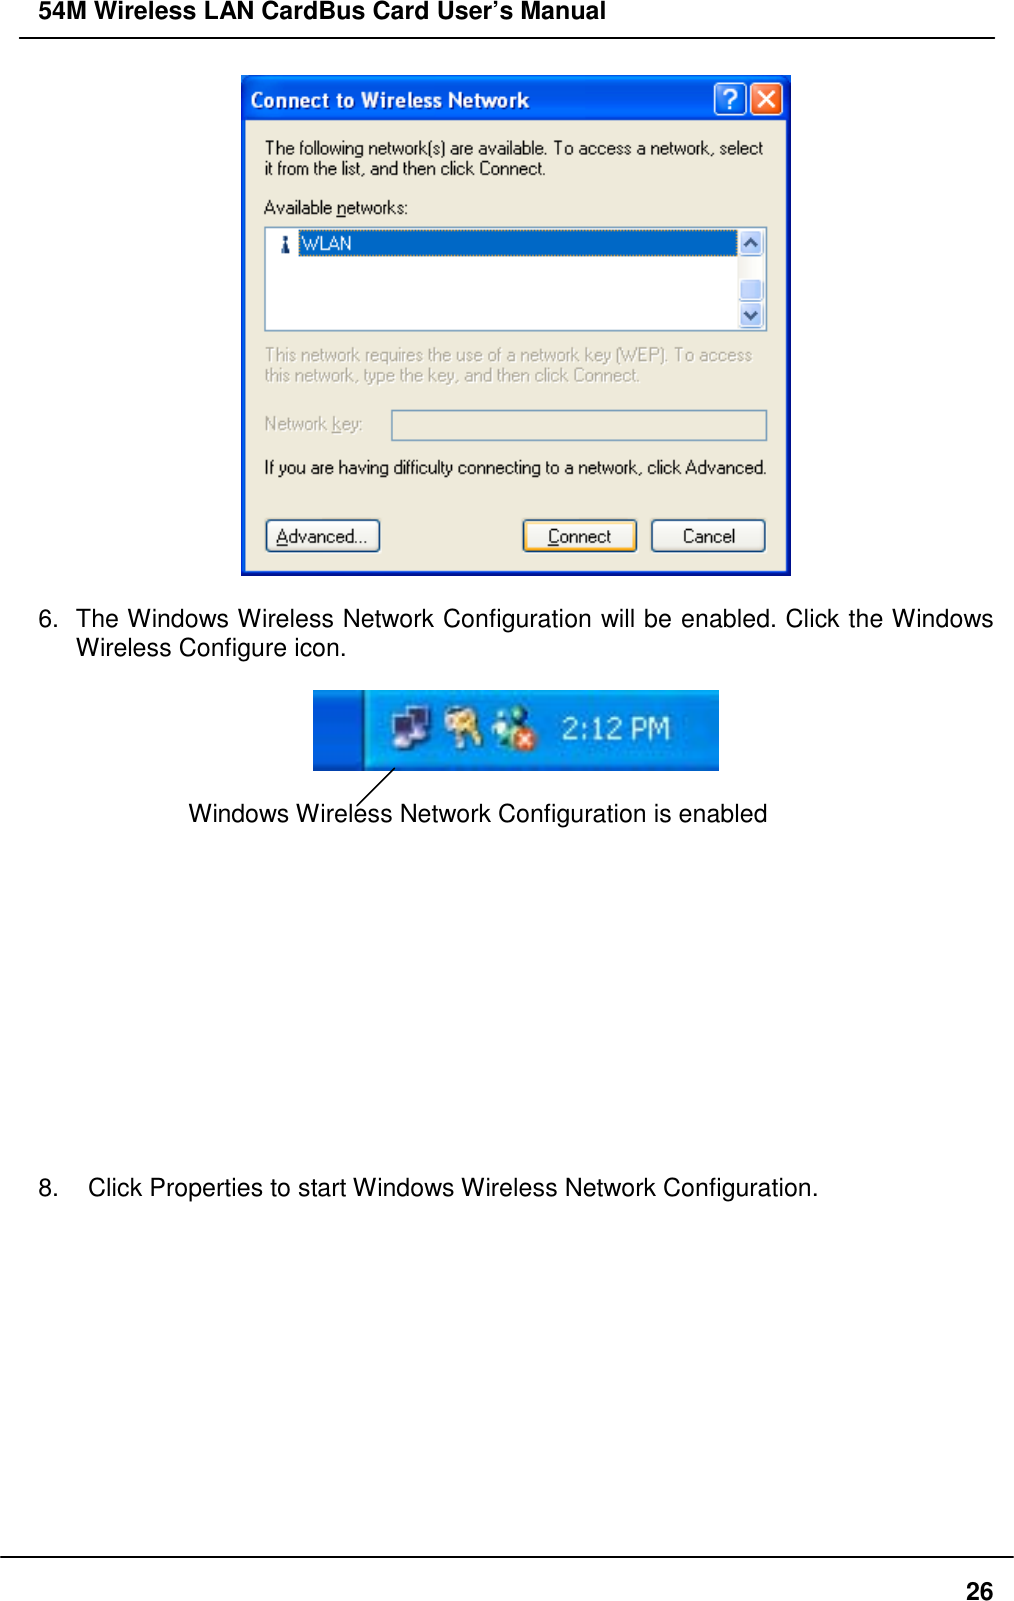 54M Wireless LAN CardBus Card User’s Manual266. The Windows Wireless Network Configuration will be enabled. Click the WindowsWireless Configure icon.Windows Wireless Network Configuration is enabled8.    Click Properties to start Windows Wireless Network Configuration.